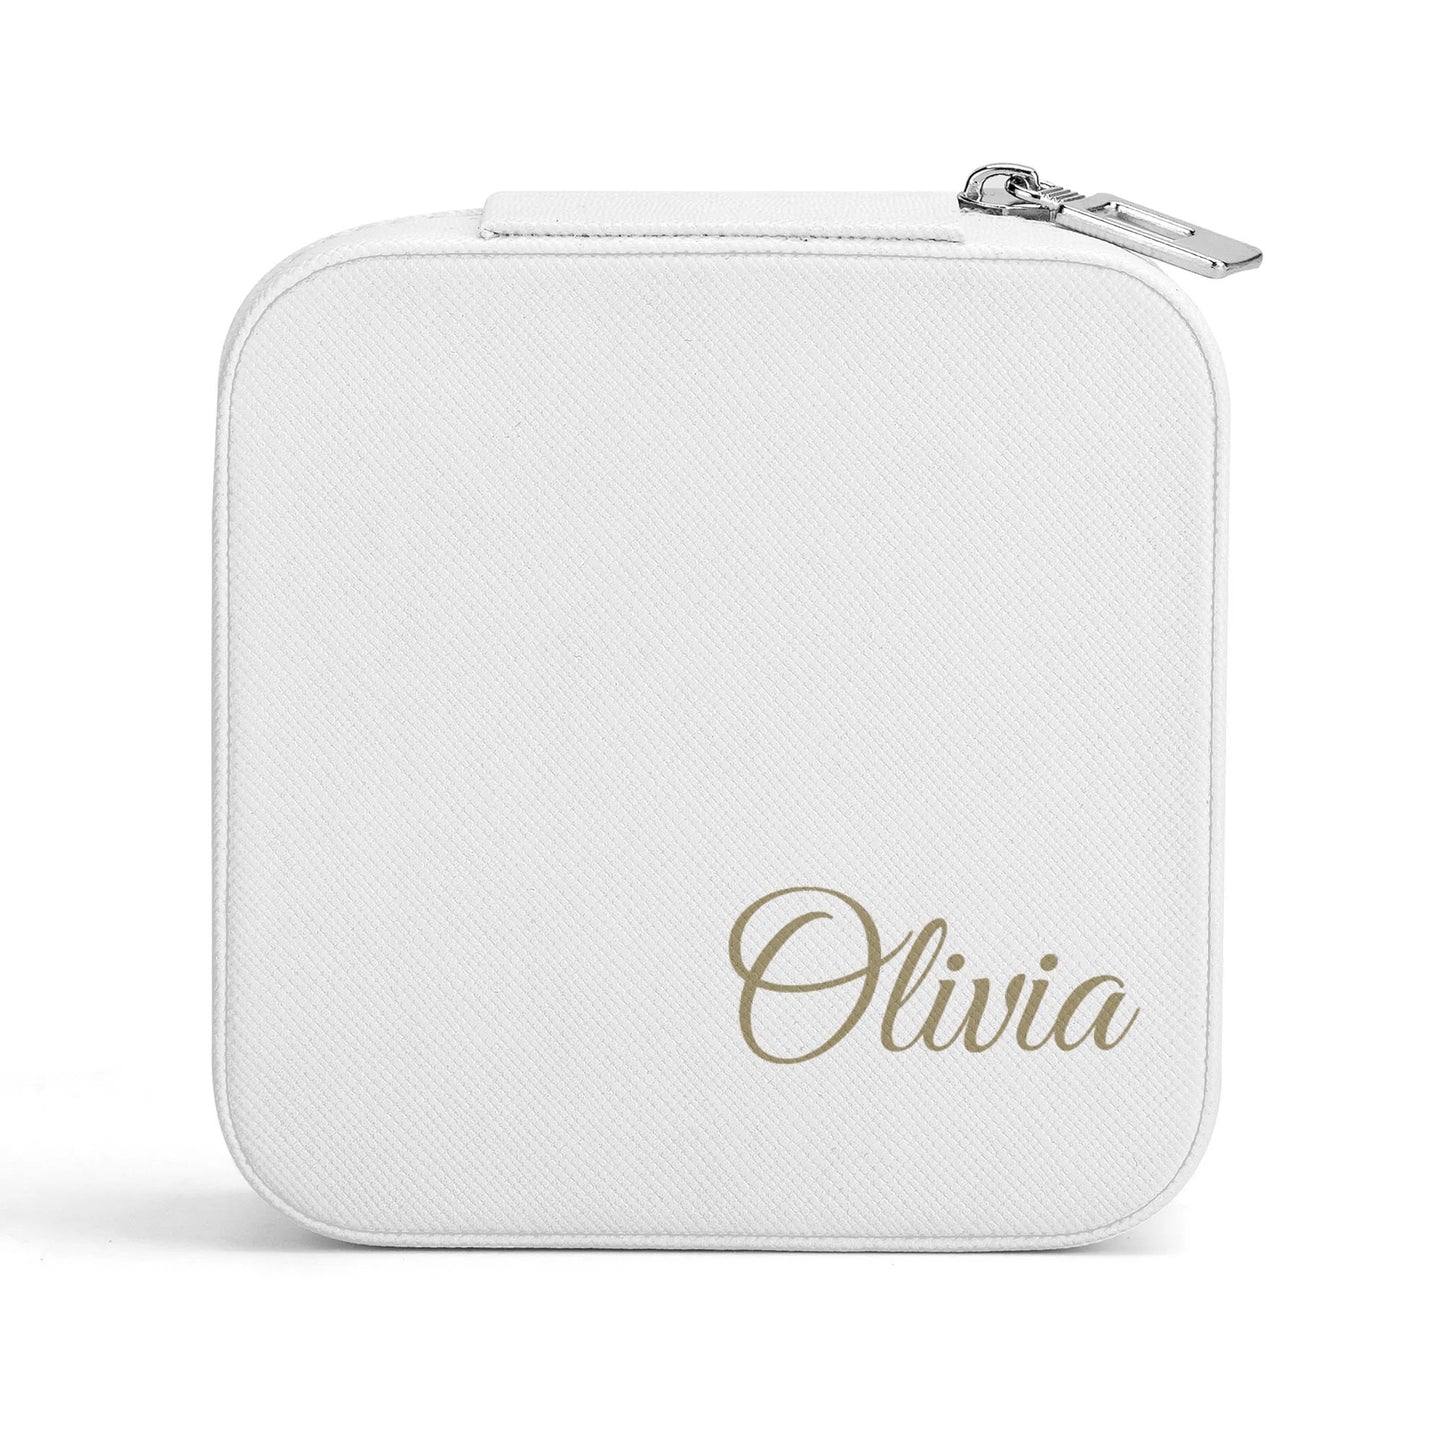 Get trendy with Personalized Square Jewelry Case Display Box with Zipper -  available at Good Gift Company. Grab yours for $10.98 today!